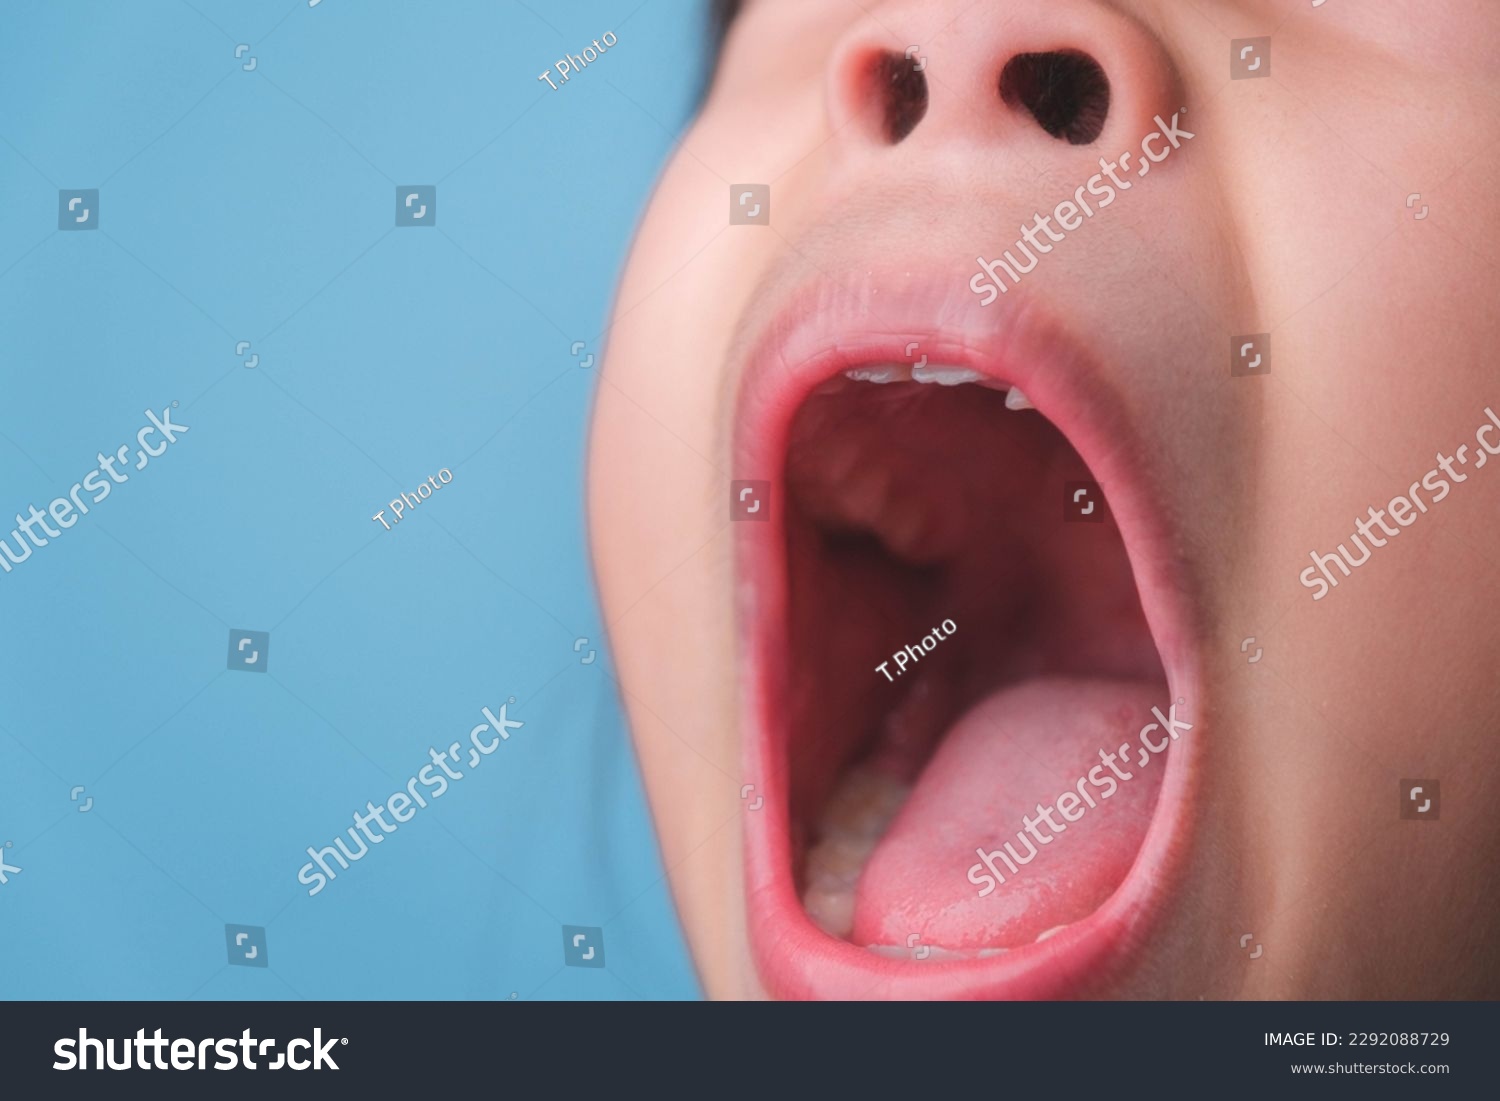 Close-up inside the oral cavity of a healthy child with beautiful rows of baby teeth. Young girl opens mouth revealing upper and lower teeth, hard palate, soft palate, dental and oral health checkup. #2292088729